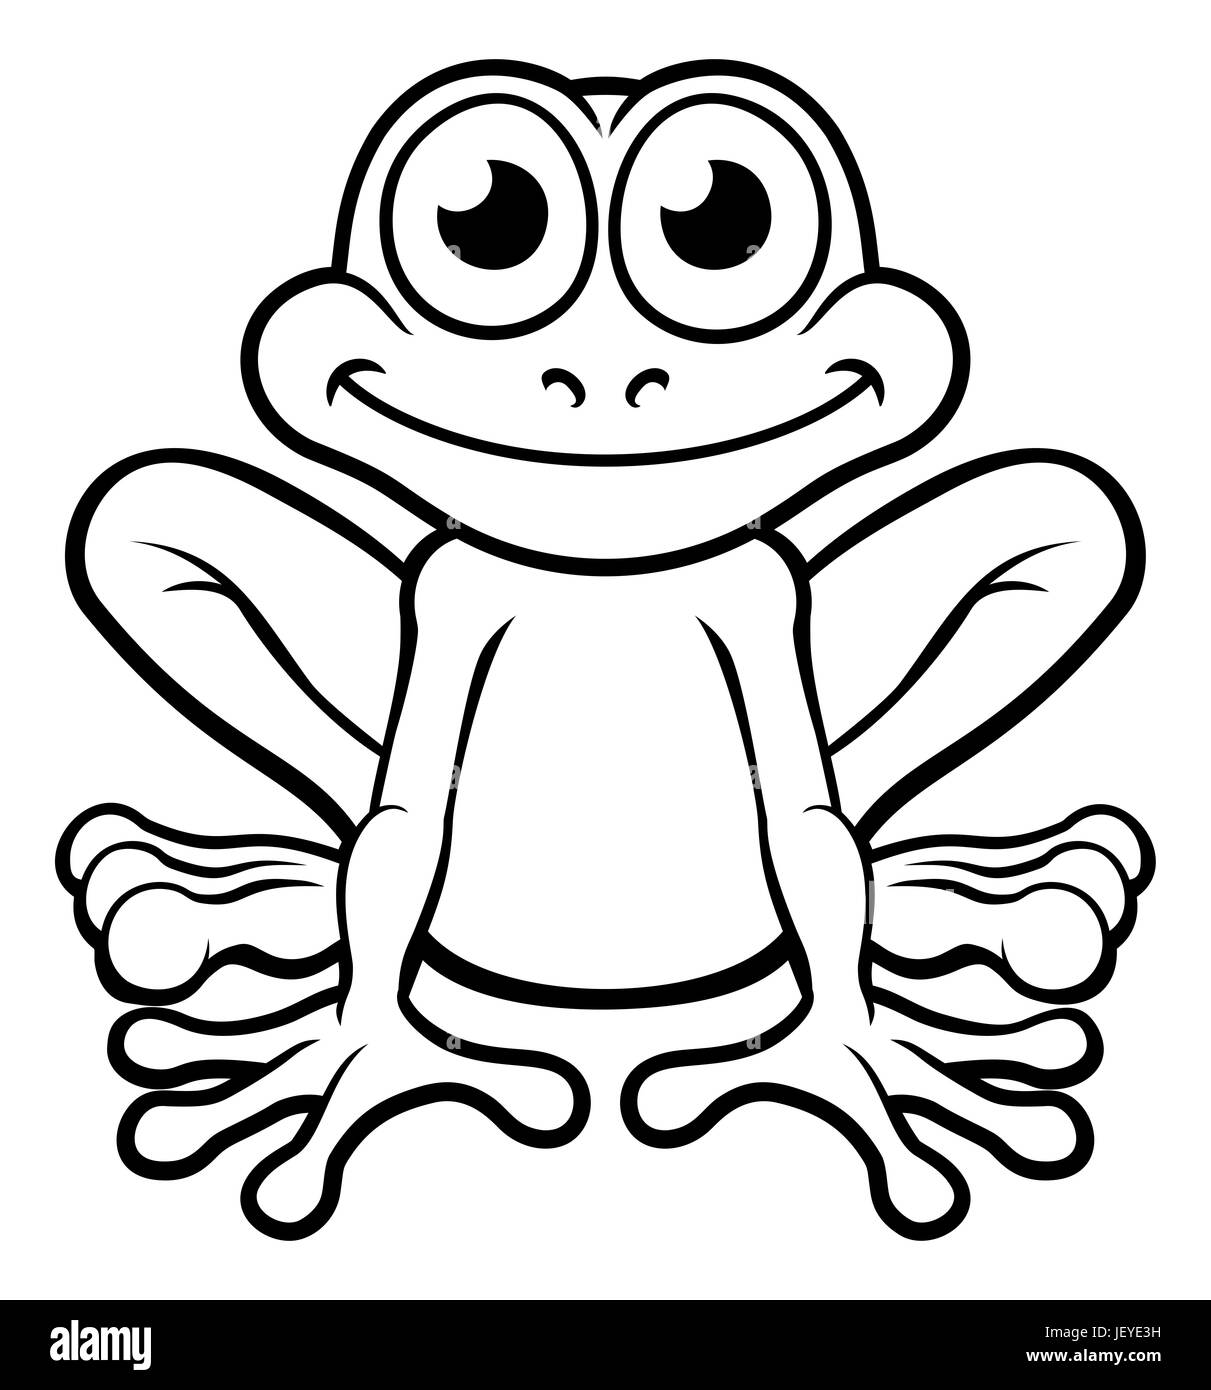 An illustration of a cute frog cartoon character outline coloring illustration Stock Photo